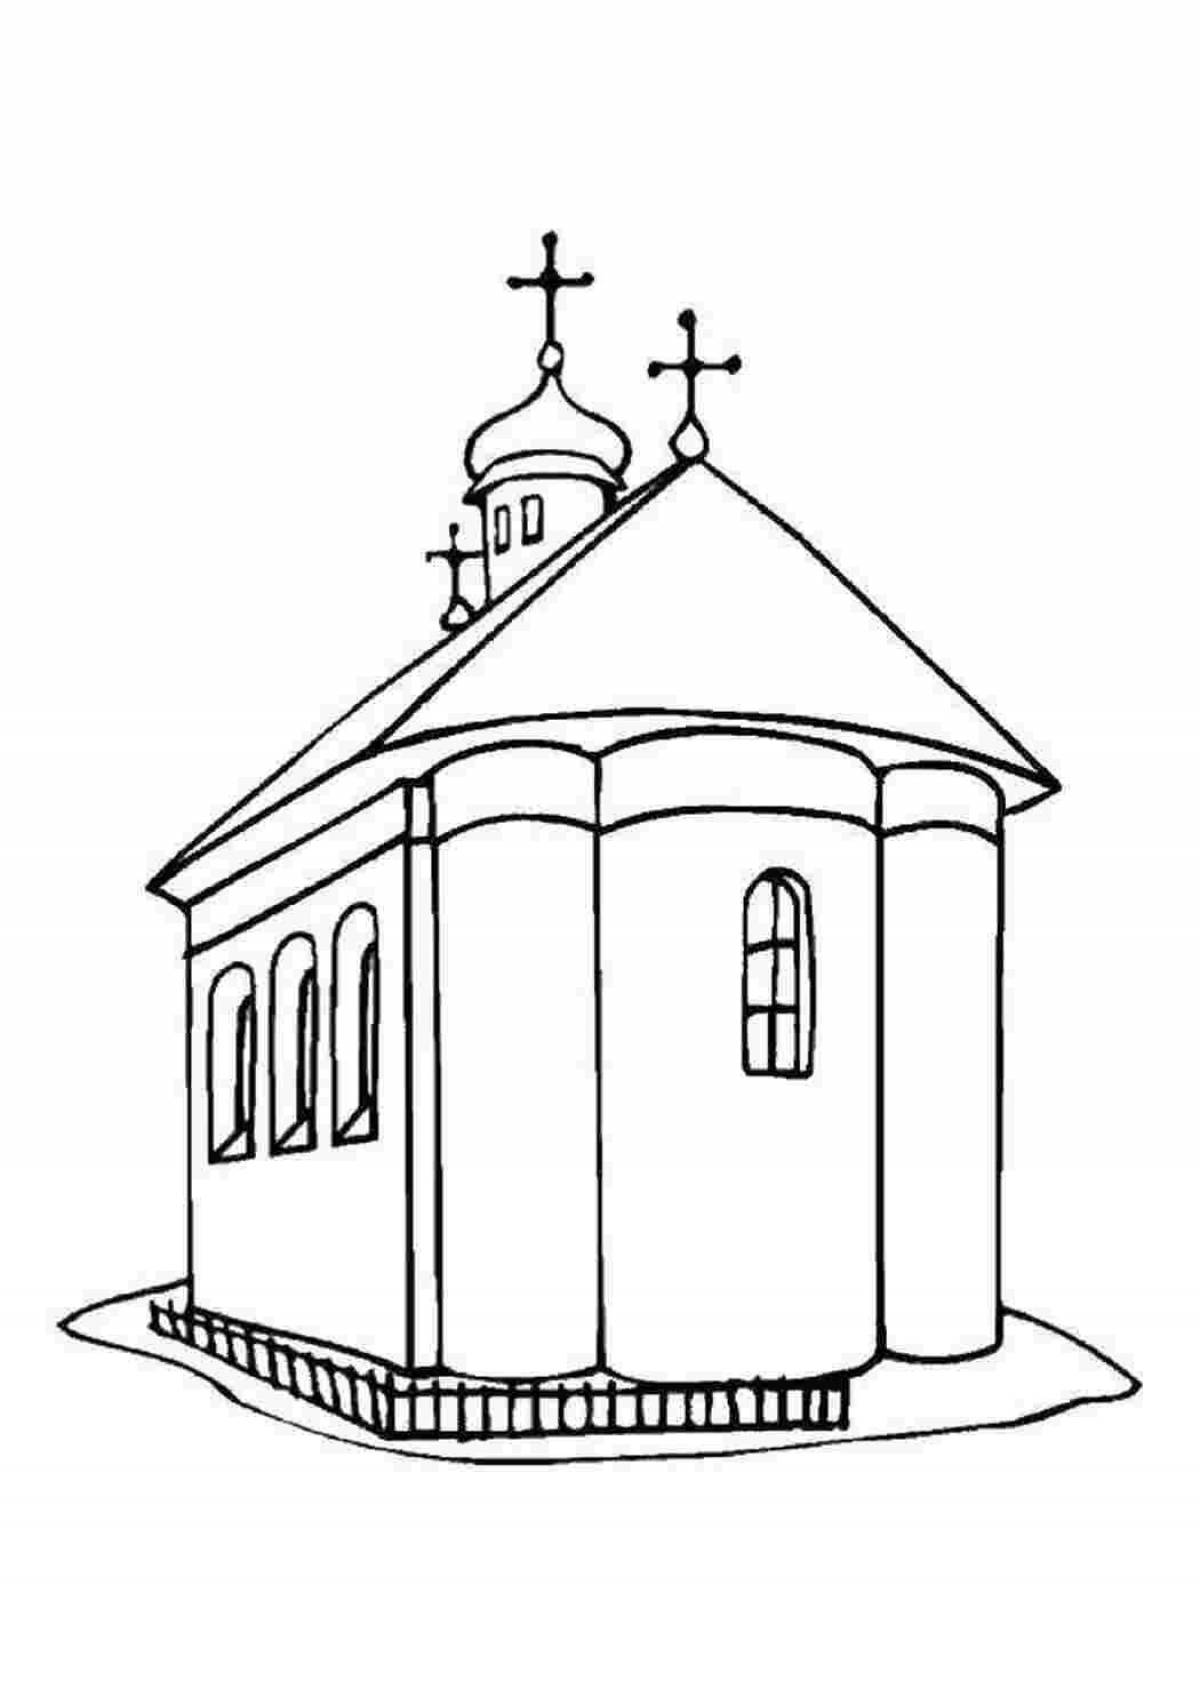 Coloring page magnanimous monastery